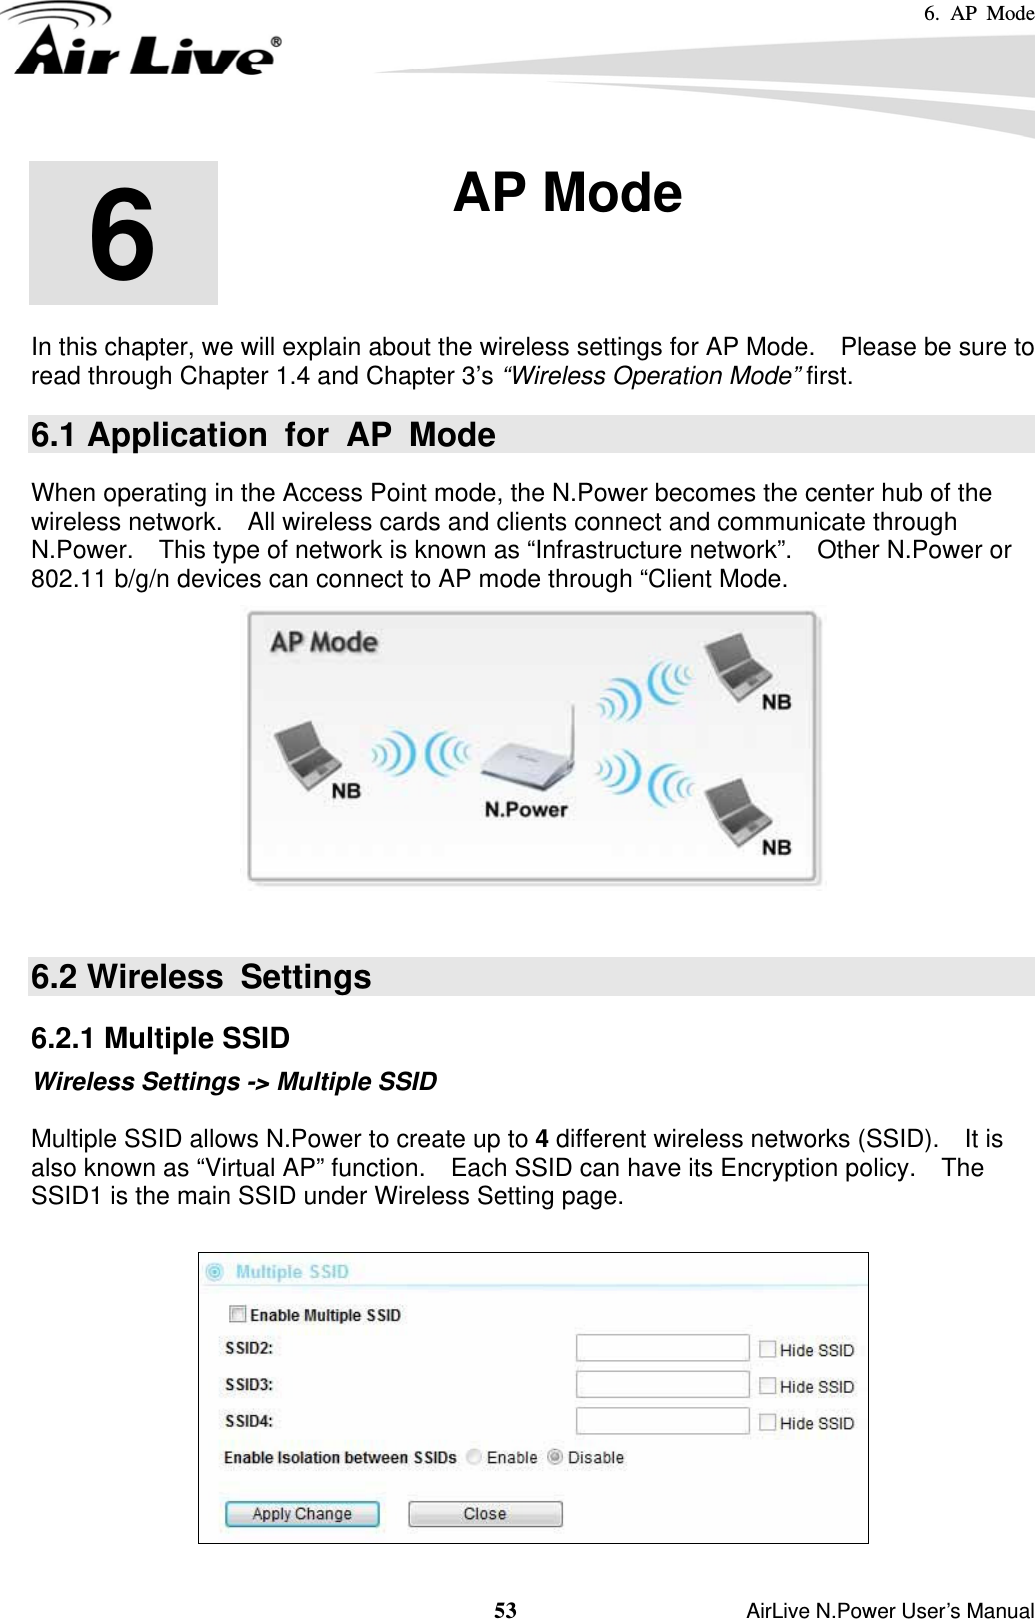 6. AP Mode  53                    AirLive N.Power User’s Manual       In this chapter, we will explain about the wireless settings for AP Mode.    Please be sure to read through Chapter 1.4 and Chapter 3’s “Wireless Operation Mode” first.   6.1 Application for AP Mode When operating in the Access Point mode, the N.Power becomes the center hub of the wireless network.    All wireless cards and clients connect and communicate through N.Power.    This type of network is known as “Infrastructure network”.    Other N.Power or 802.11 b/g/n devices can connect to AP mode through “Client Mode.   6.2 Wireless  Settings 6.2.1 Multiple SSID Wireless Settings -&gt; Multiple SSID  Multiple SSID allows N.Power to create up to 4 different wireless networks (SSID).  It is also known as “Virtual AP” function.    Each SSID can have its Encryption policy.    The SSID1 is the main SSID under Wireless Setting page.   6  6. AP Mode  